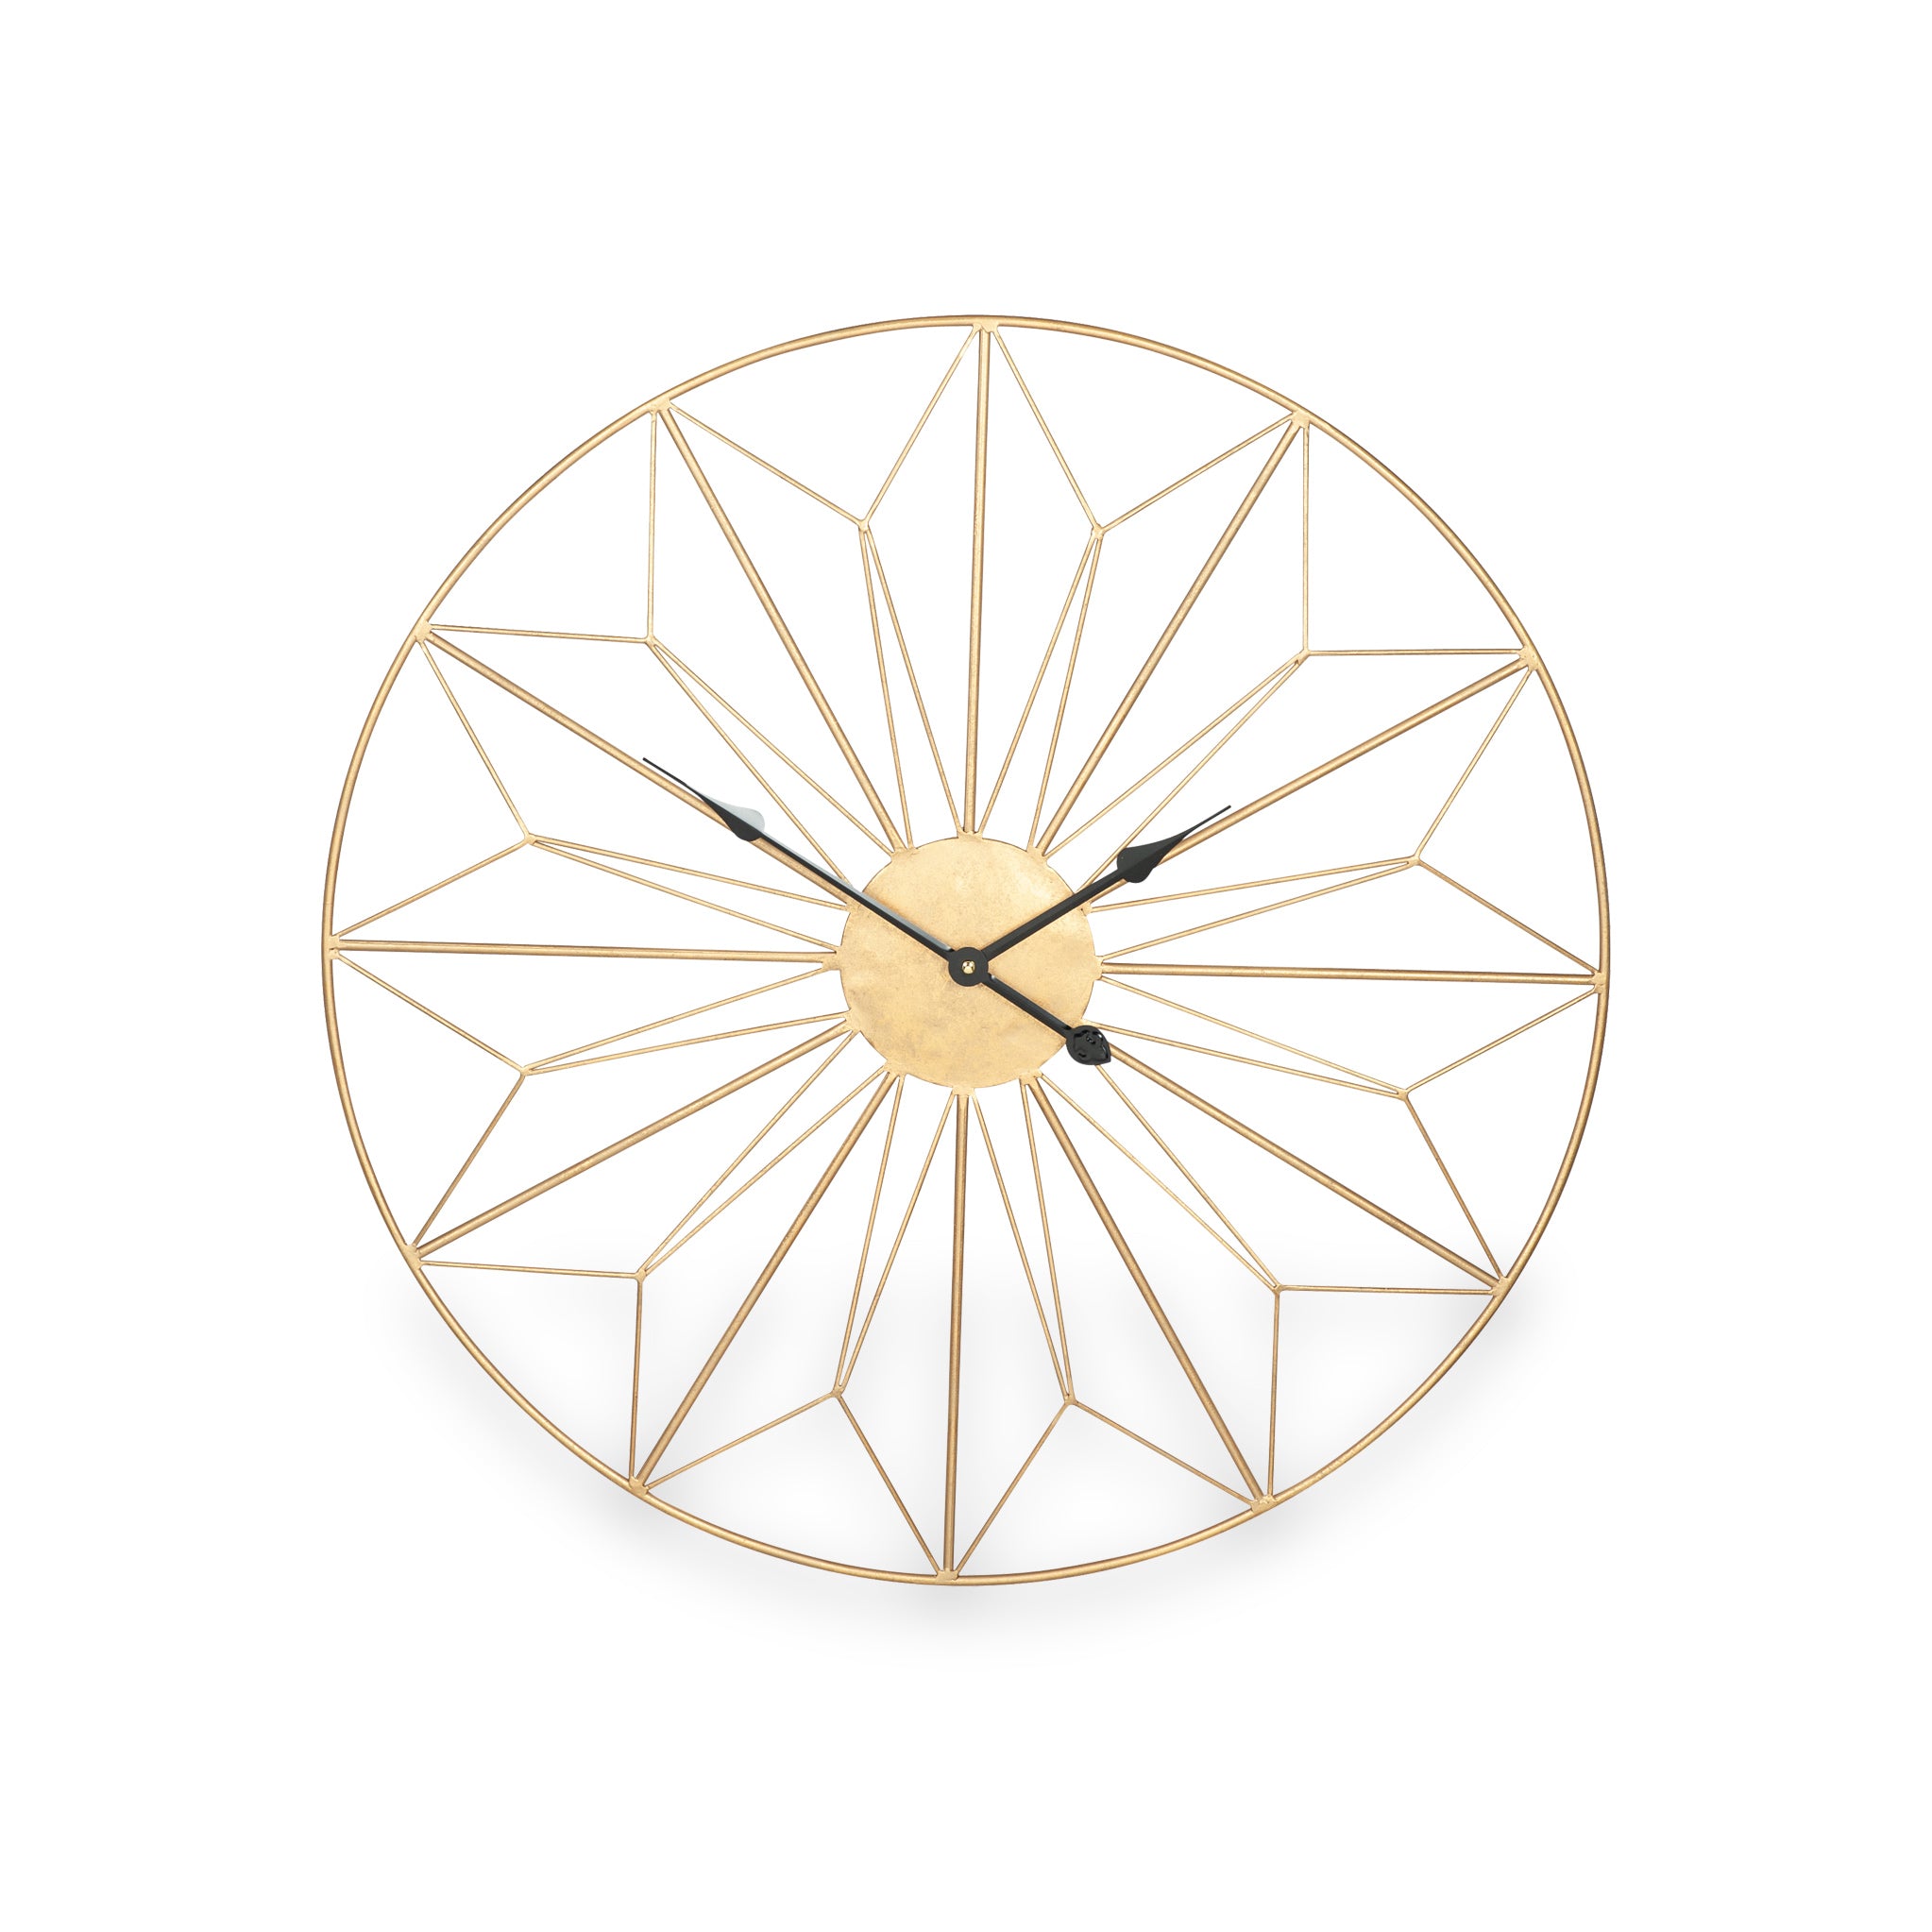 Antique Gold Metal Geo Design Round Wall Clock For Living Room